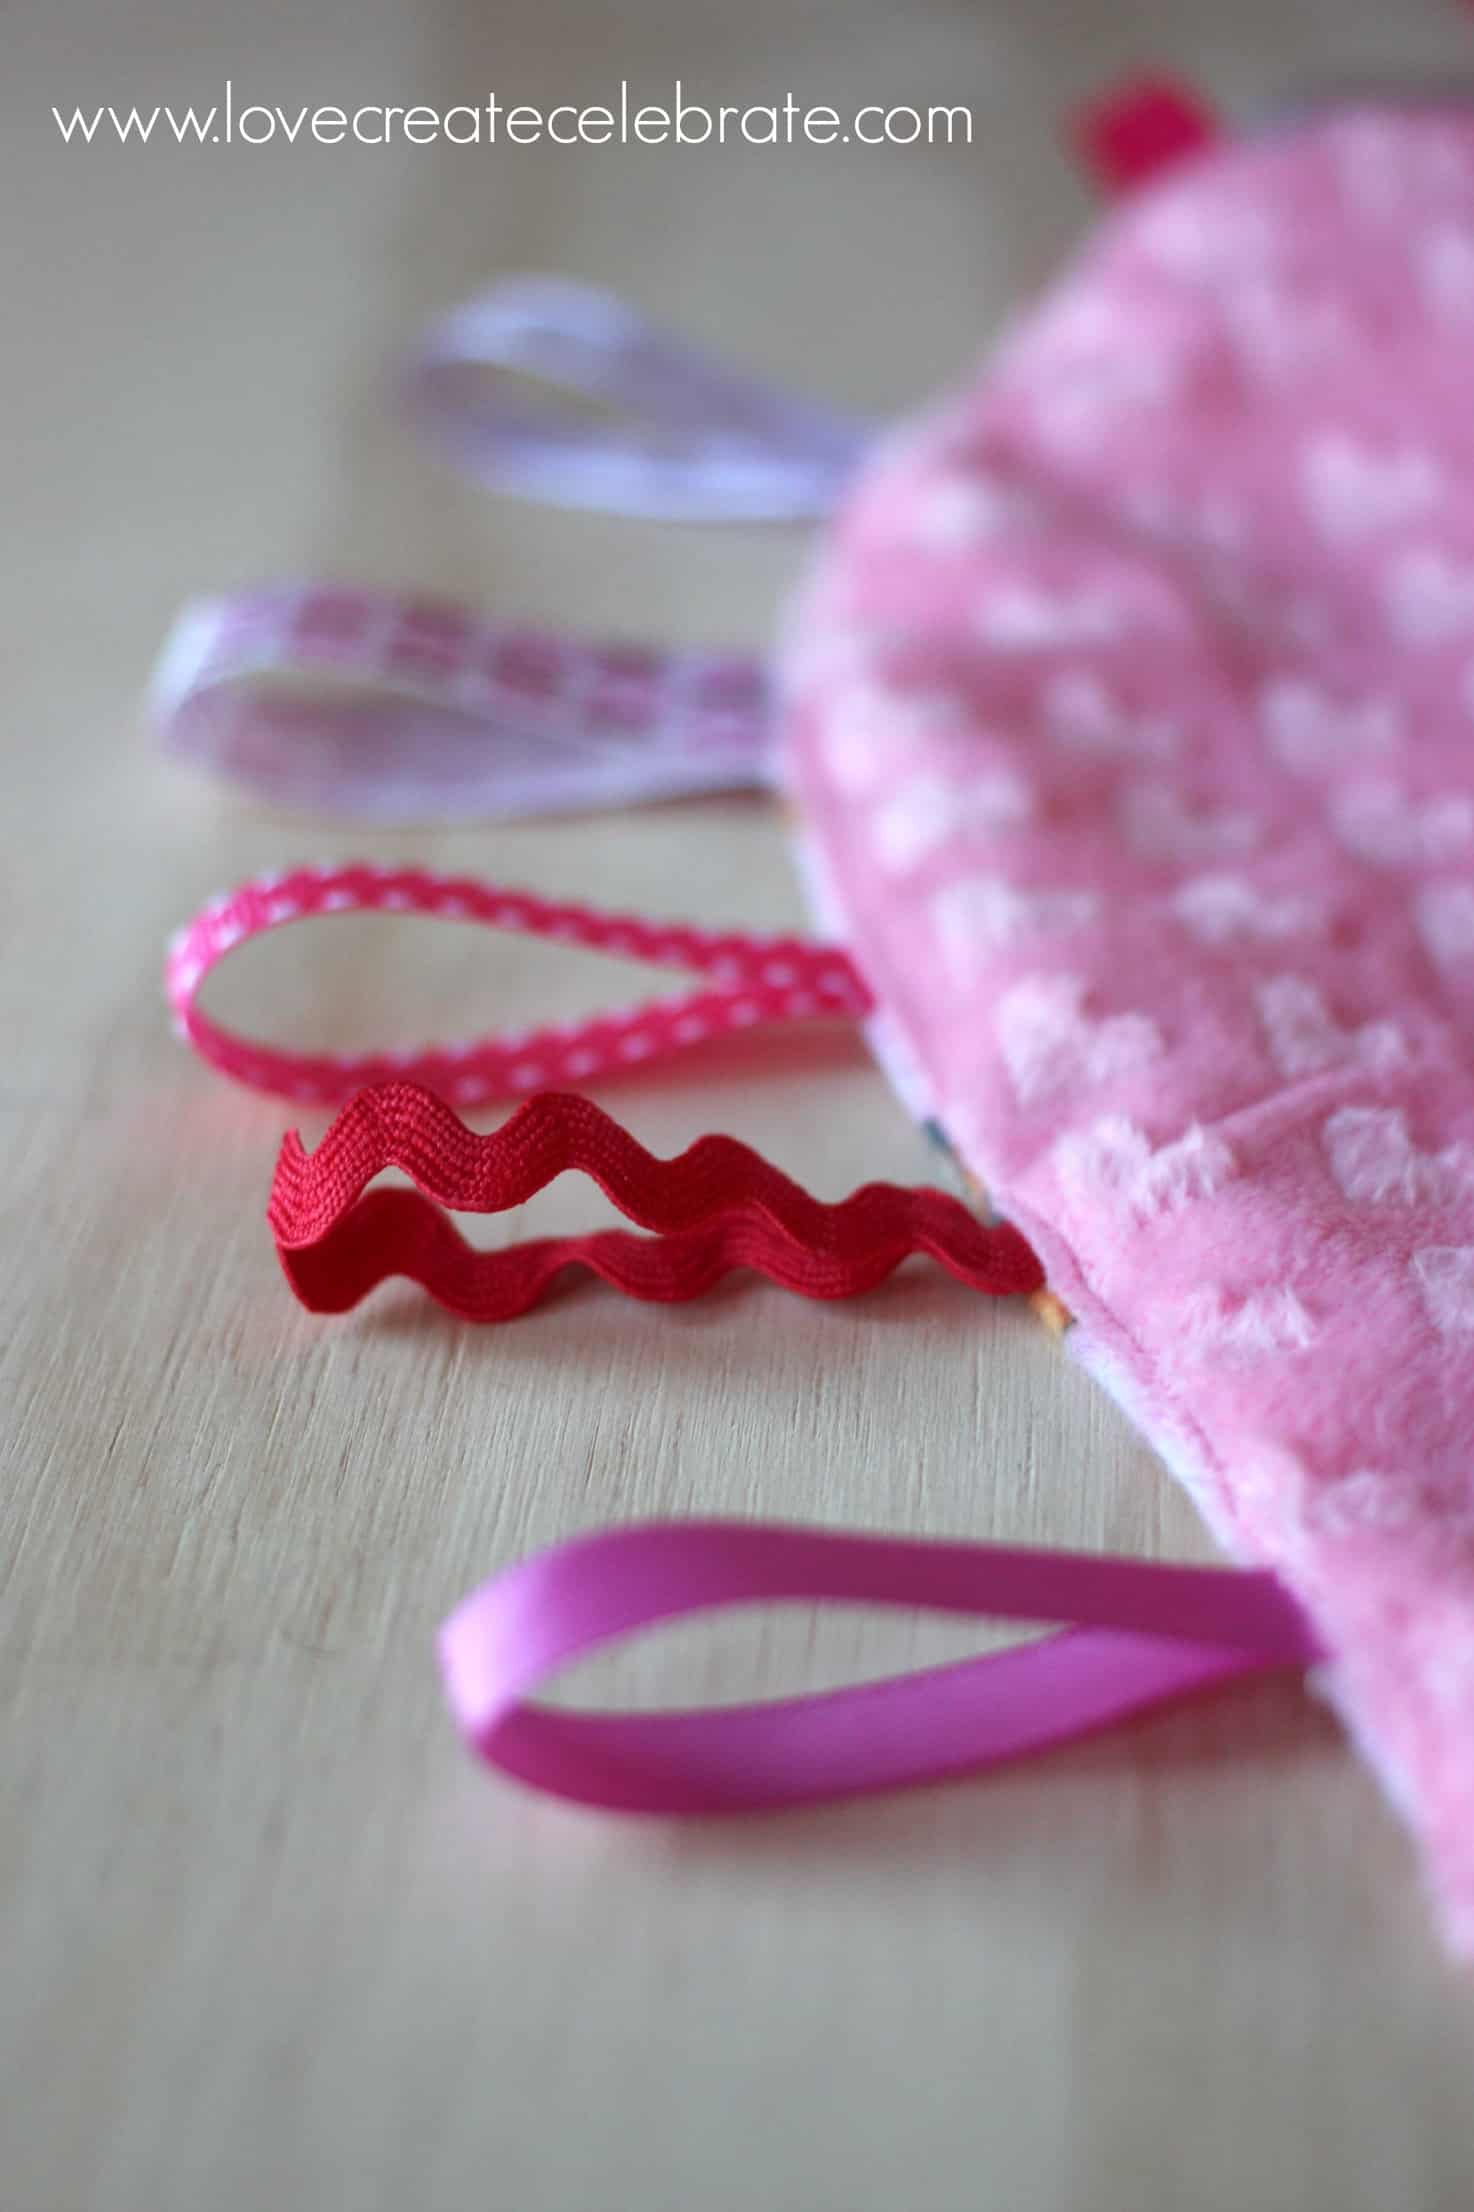 Ribbons on the heart taggie blanket